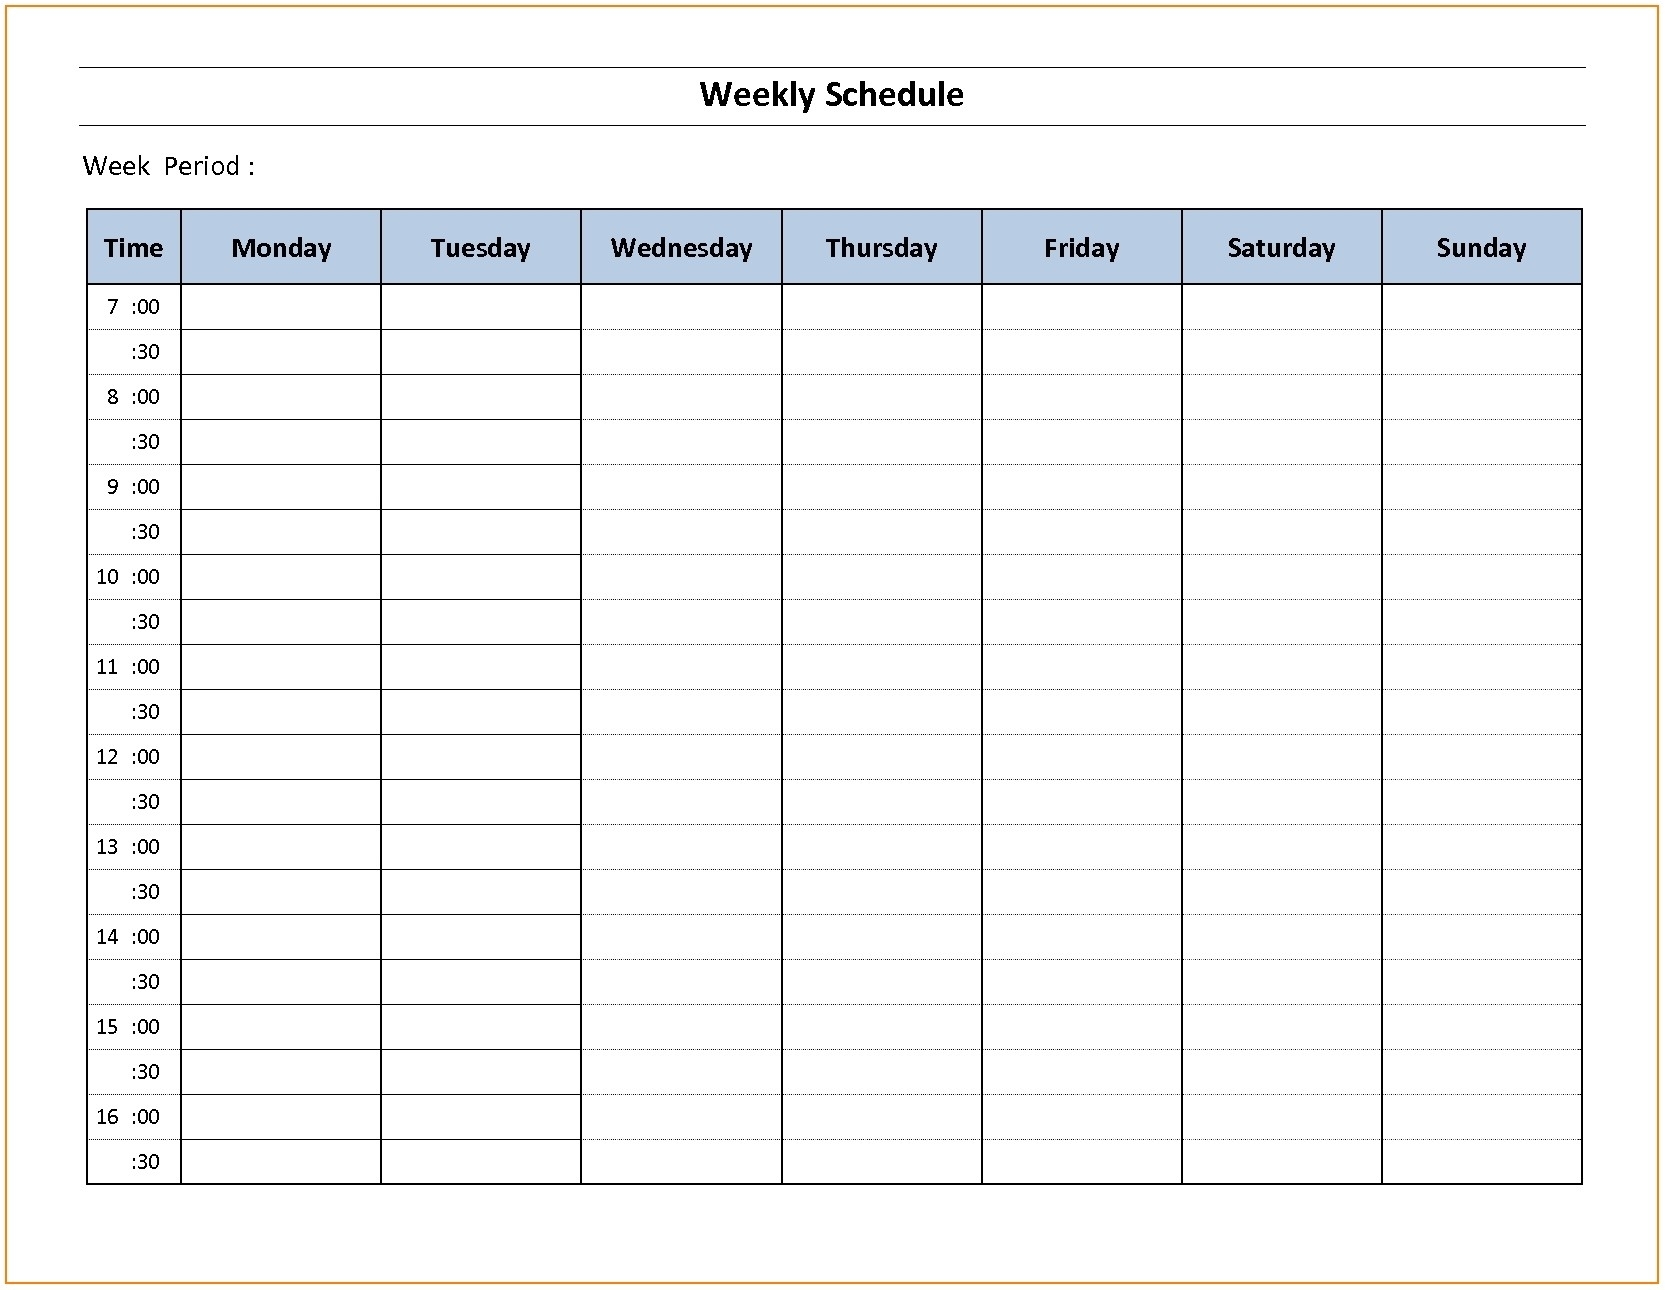 Weekly Employee Schedule Template Monday Sunday – Template Calendar inside Monday - Sunday Calendar Template